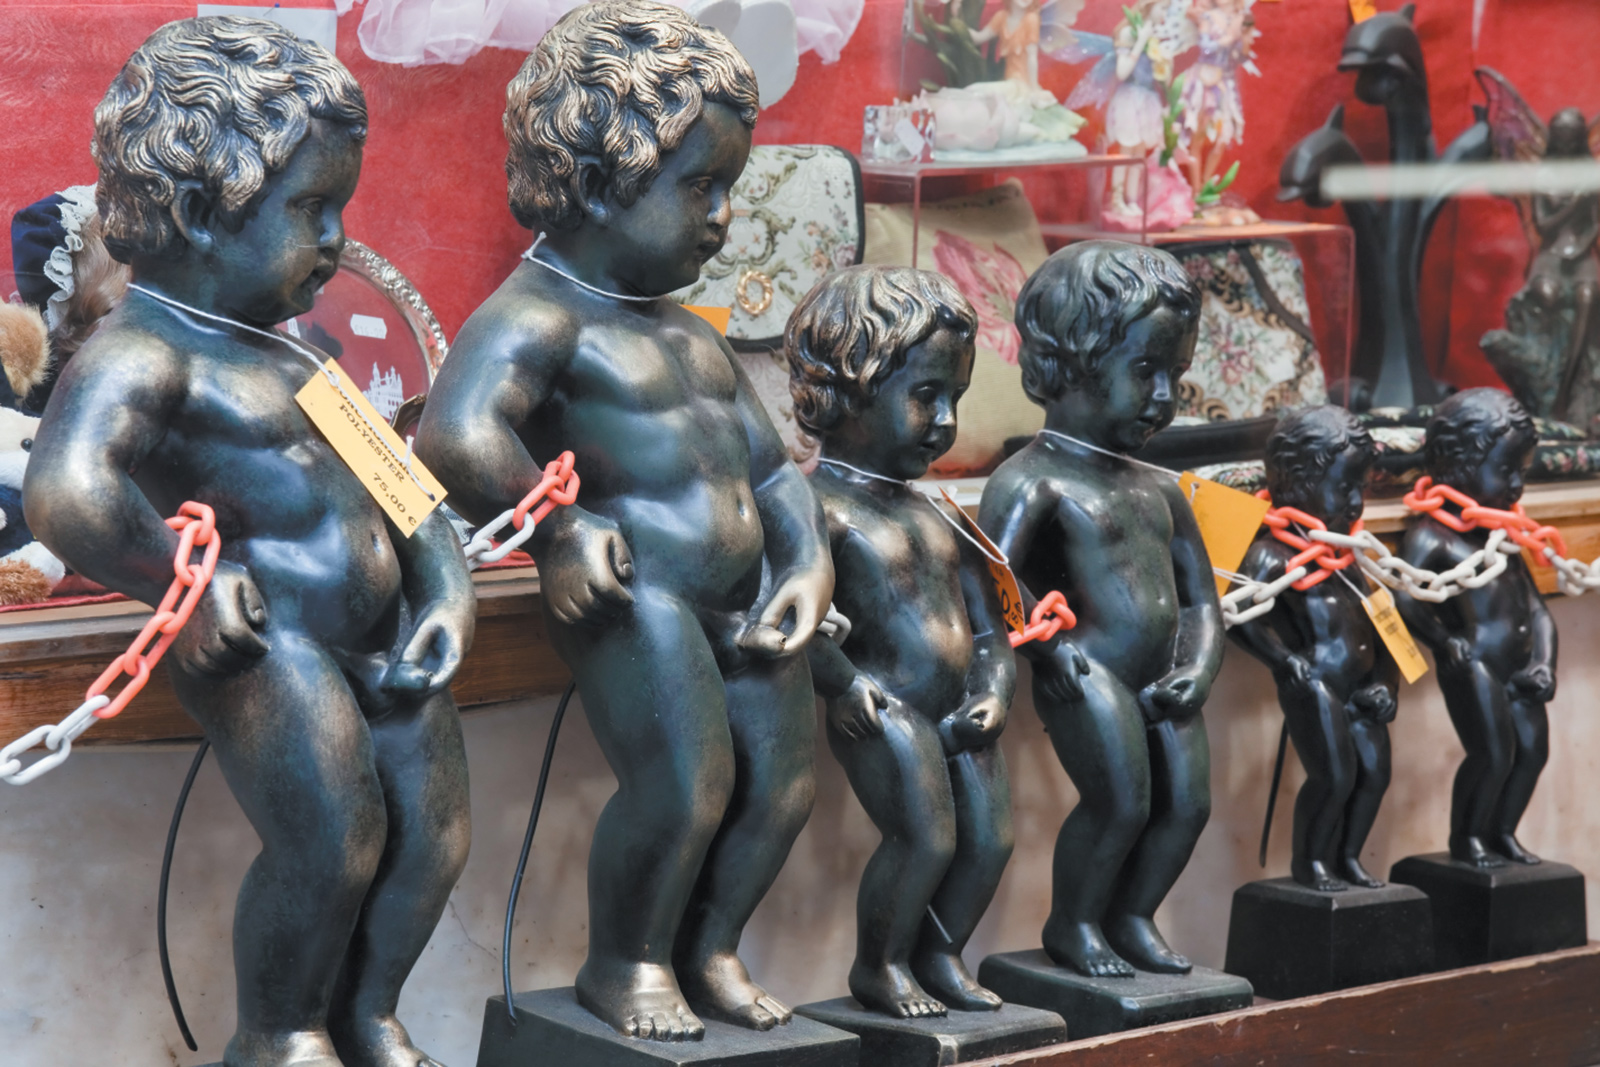 Replicas of ‘the most famous symbol of the city,’ the seventeenth-century bronze figure of the Manneken Pis, or ‘Little Pisser,’ for sale in Brussels, 2009